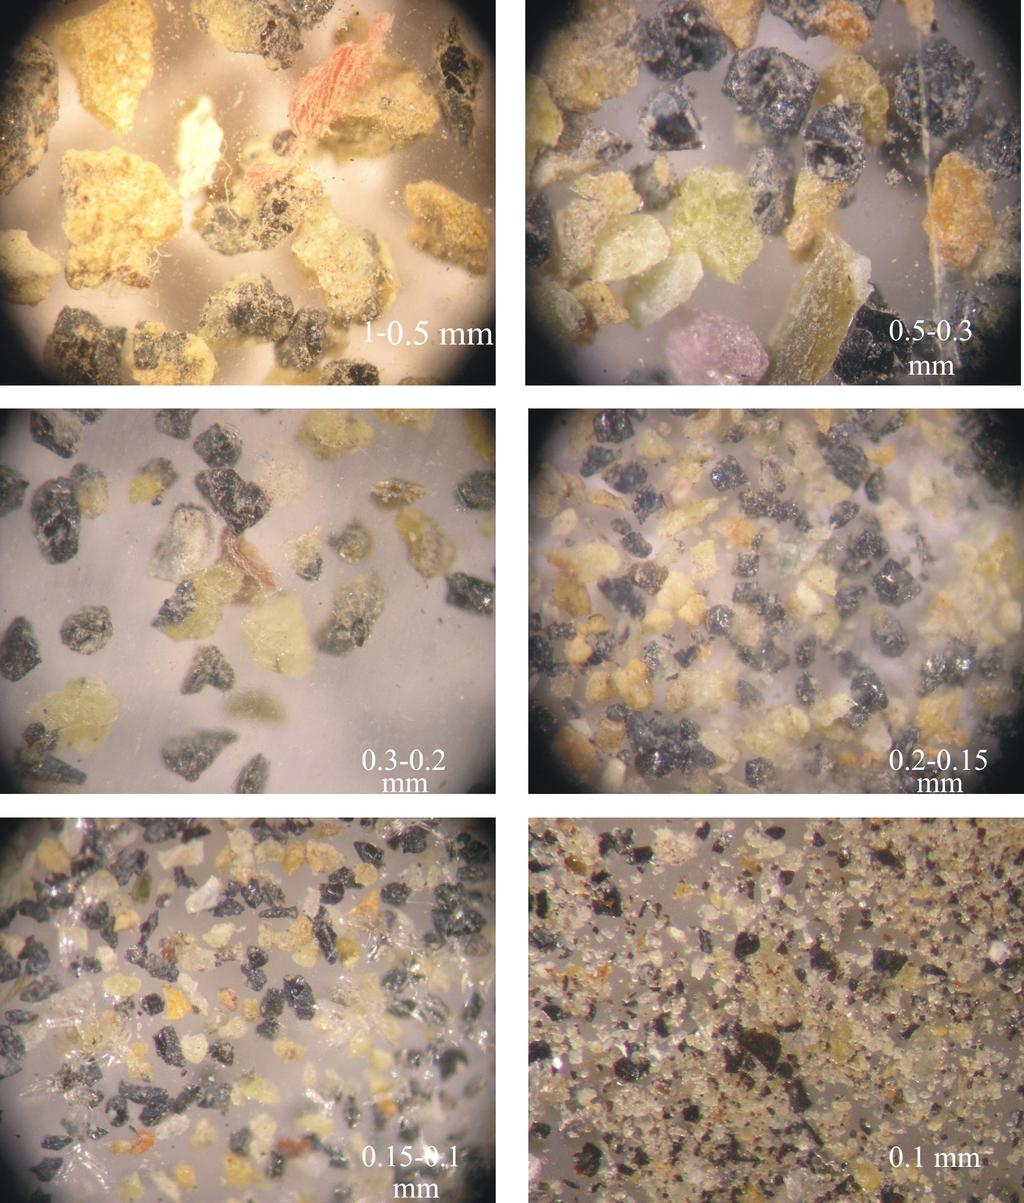 Vol. 22, No. 3 (2010) Use of Gravimetric Separators for Gunduzler Chromite Ore 2419 Very small (ca. 2 µ) sulfide grains are located in cracks of the chromite crystals (Figs. 1b and c).